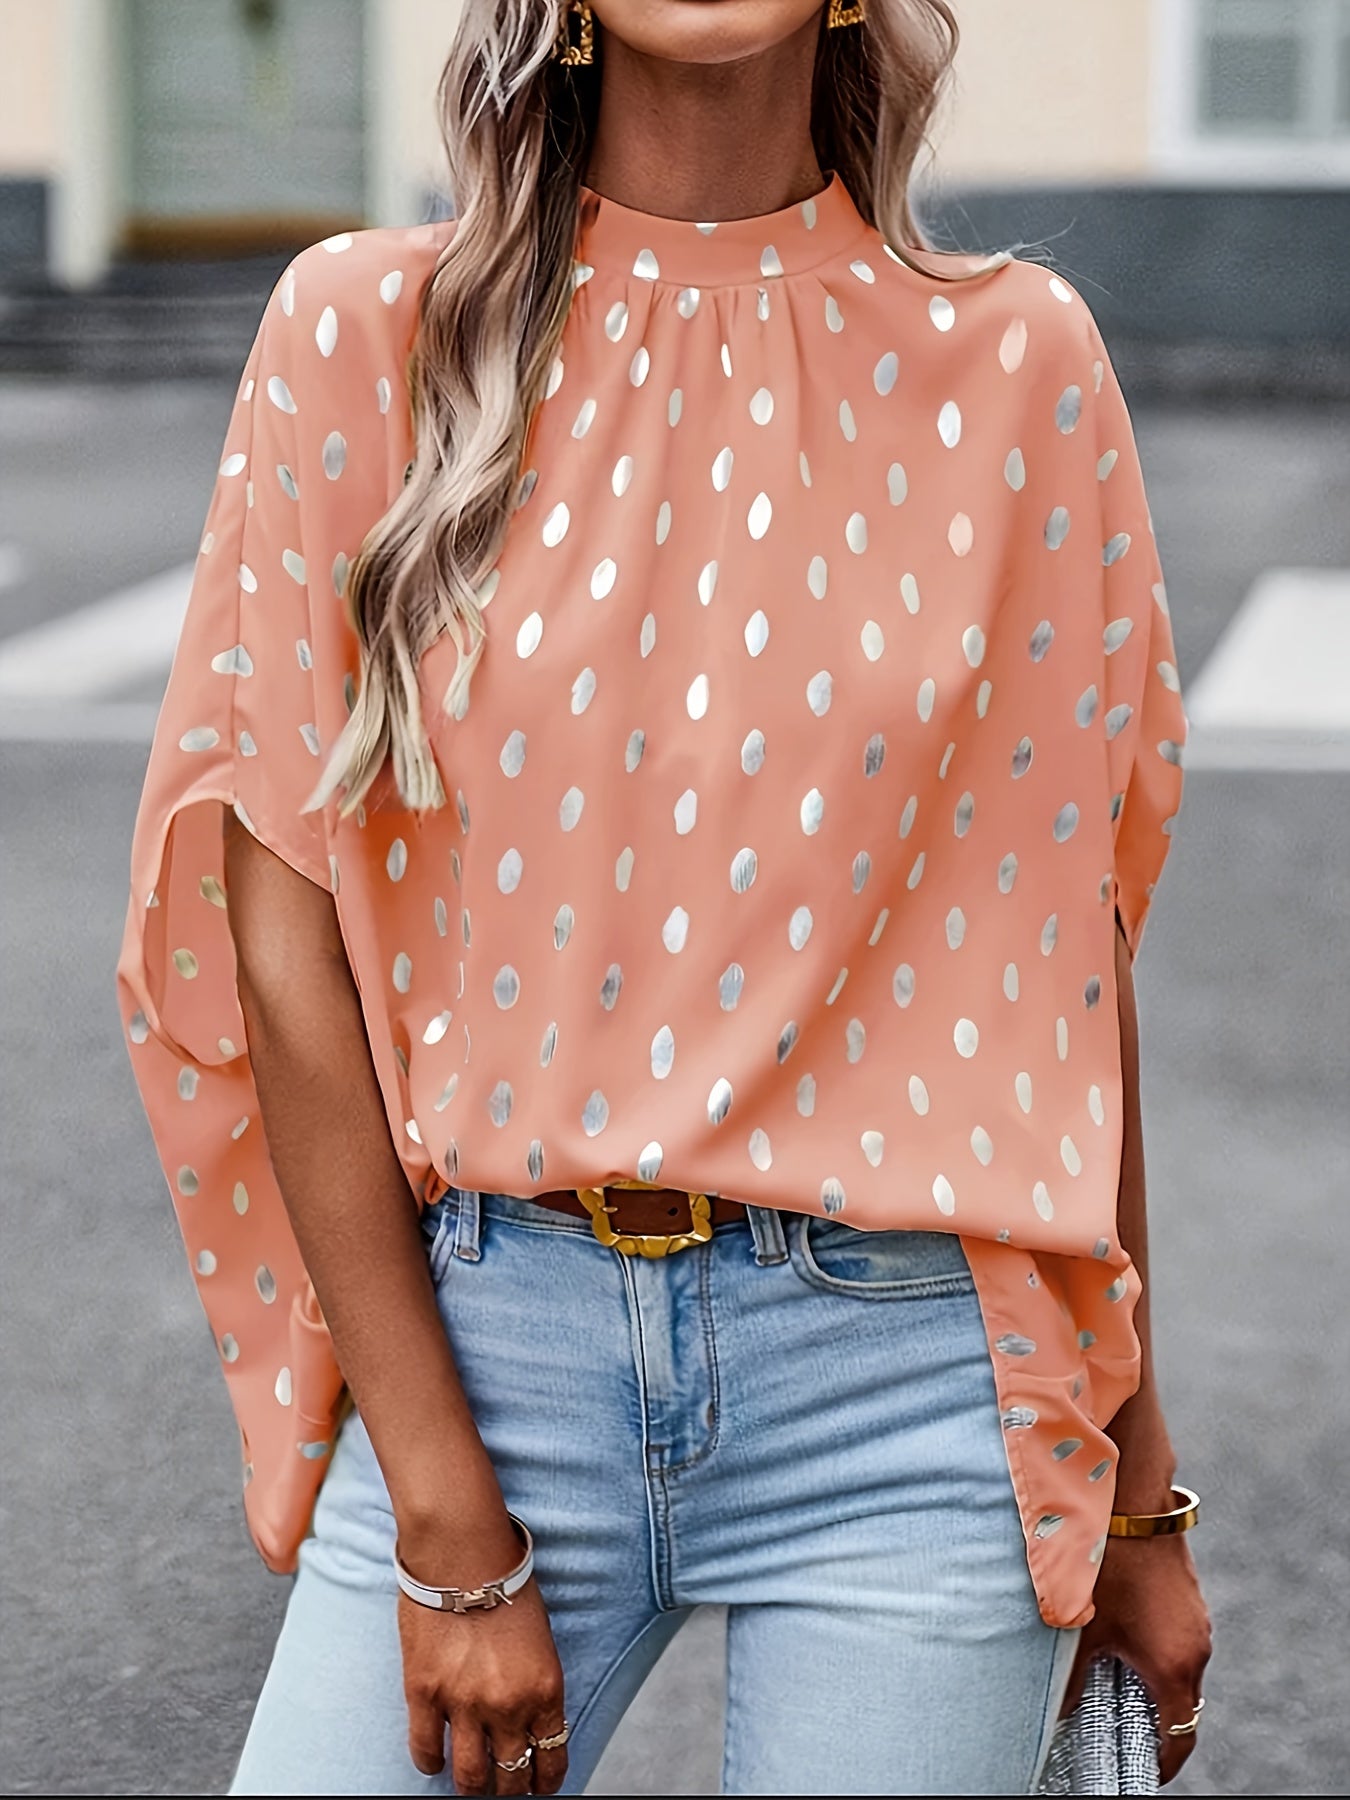 Plus Size Polka Dot Delight - Flattering Crew Neck Blouse with 3/4 Sleeves - Versatile Casual Wear for Spring to Fall - Womens Fashion Plus Size Clothing Staple